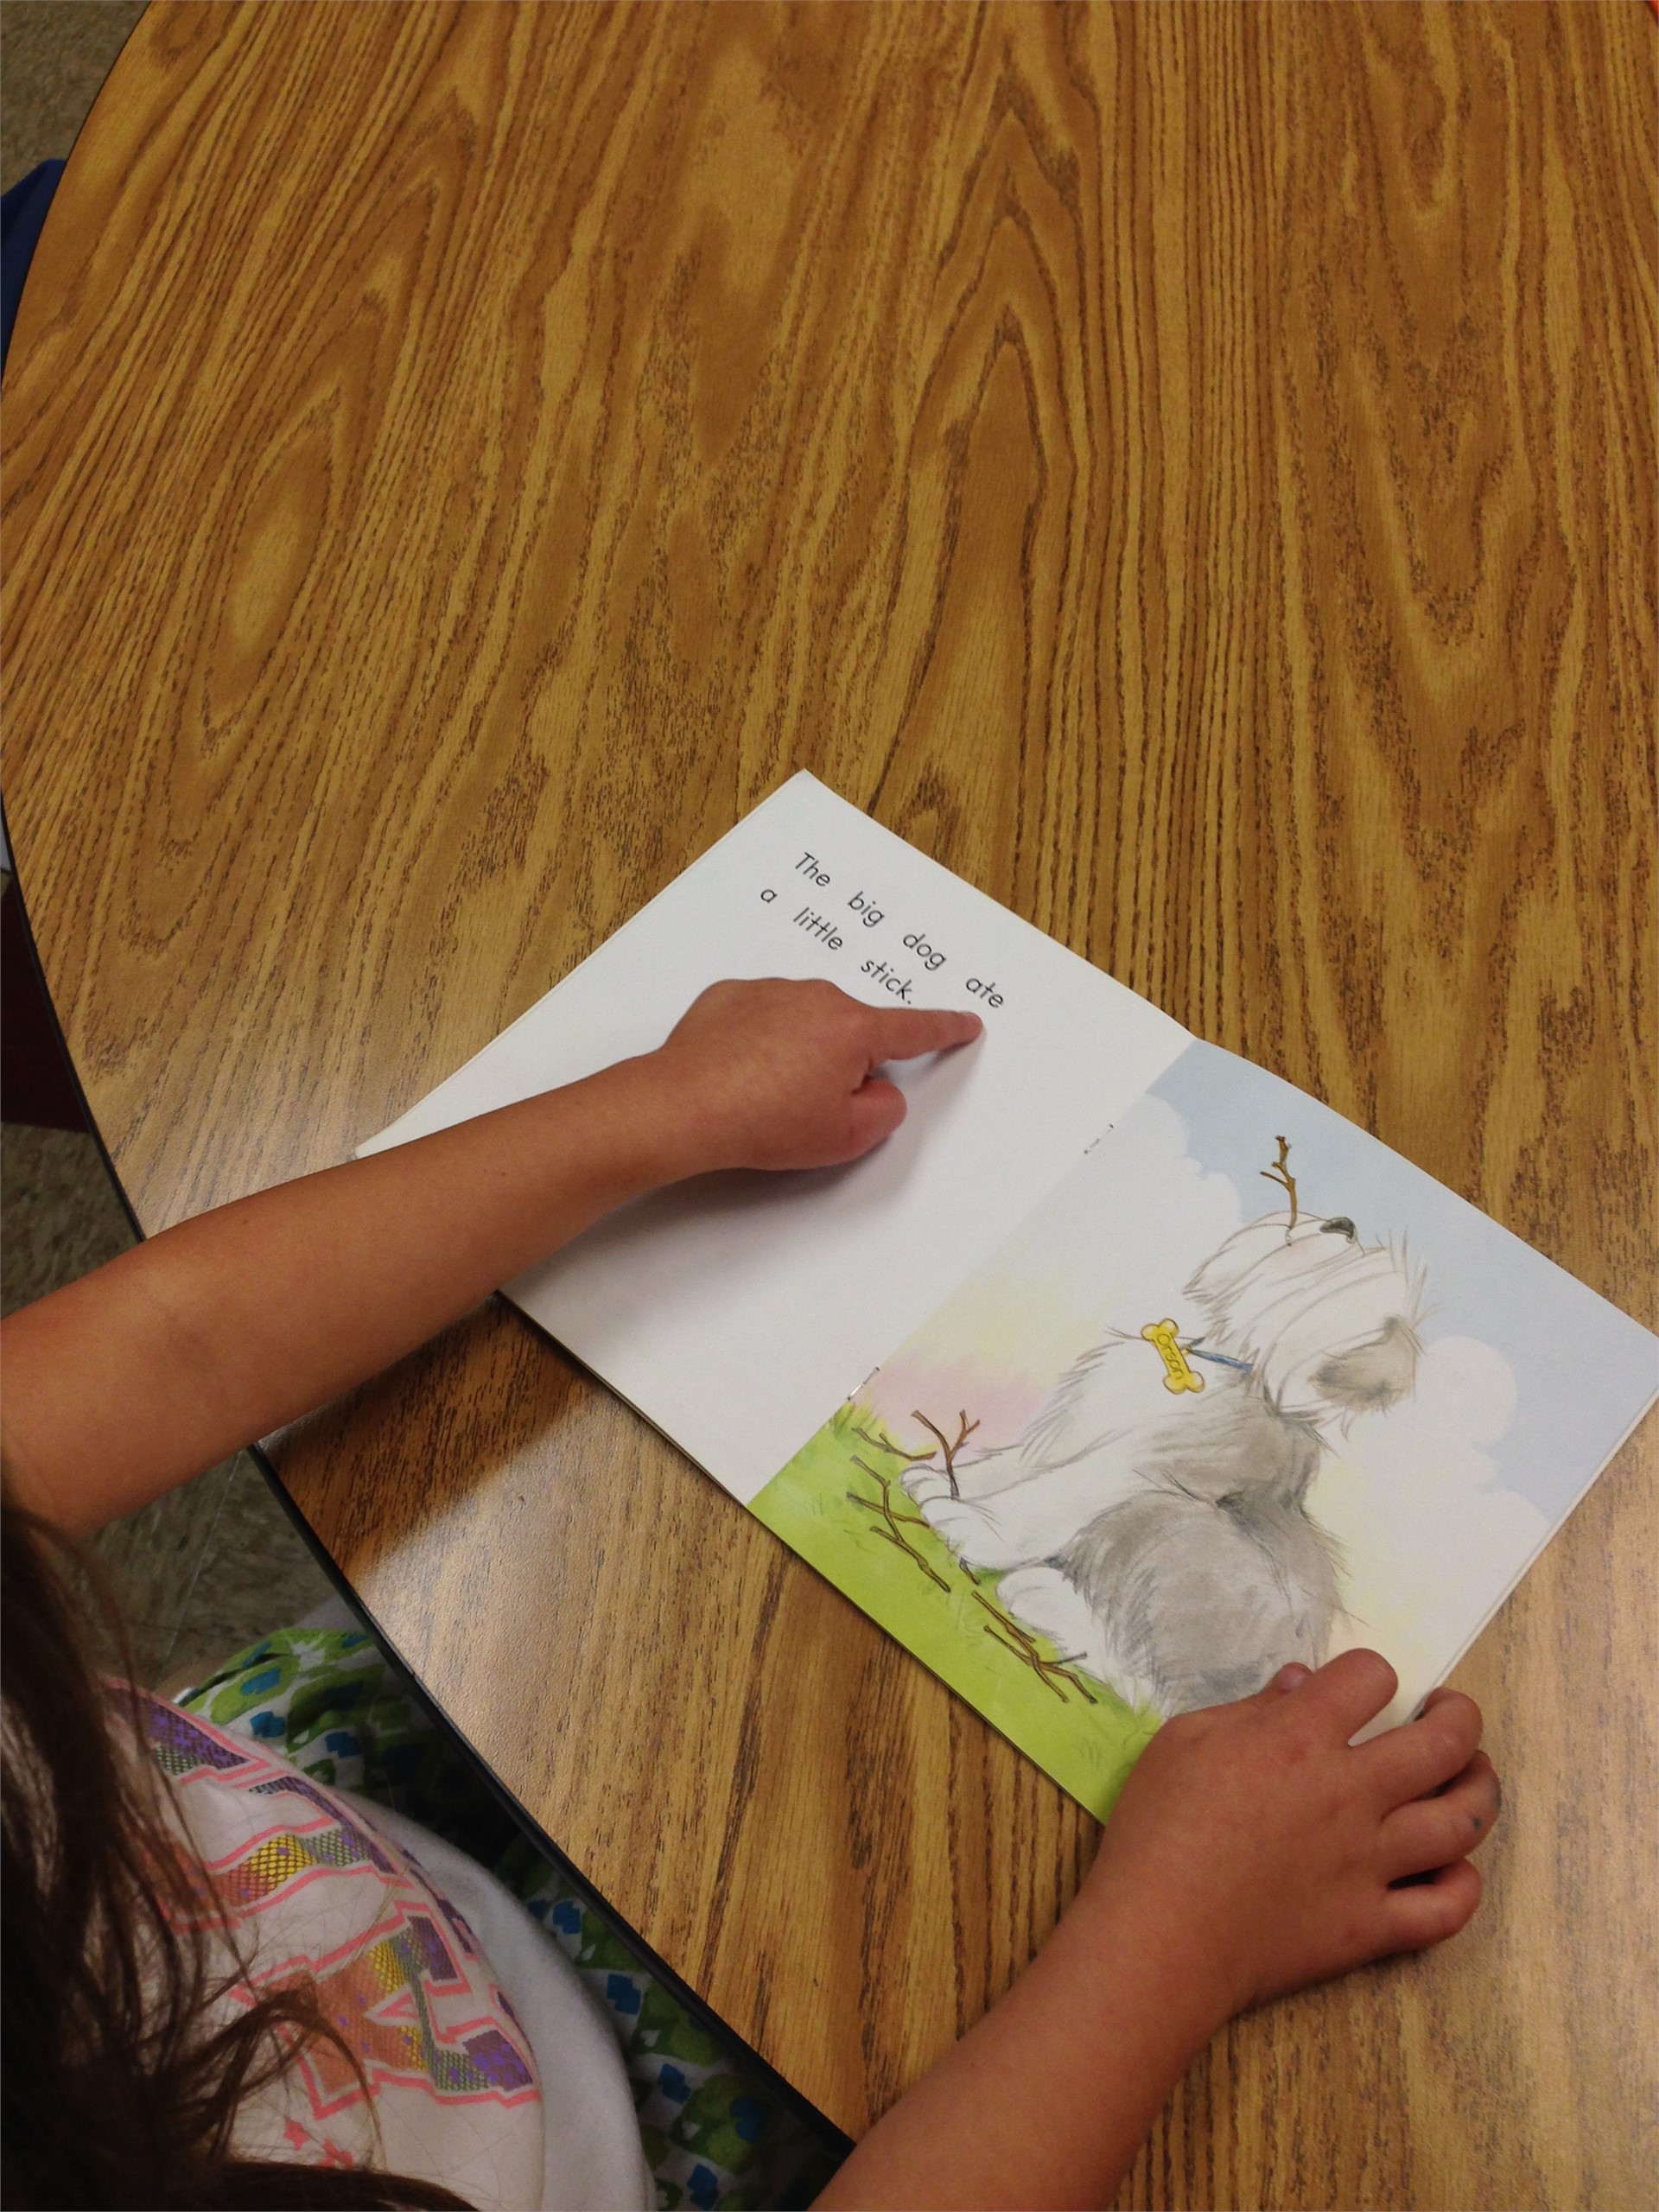 Students read a new book at a lower level to build confidence and practice sight words. 